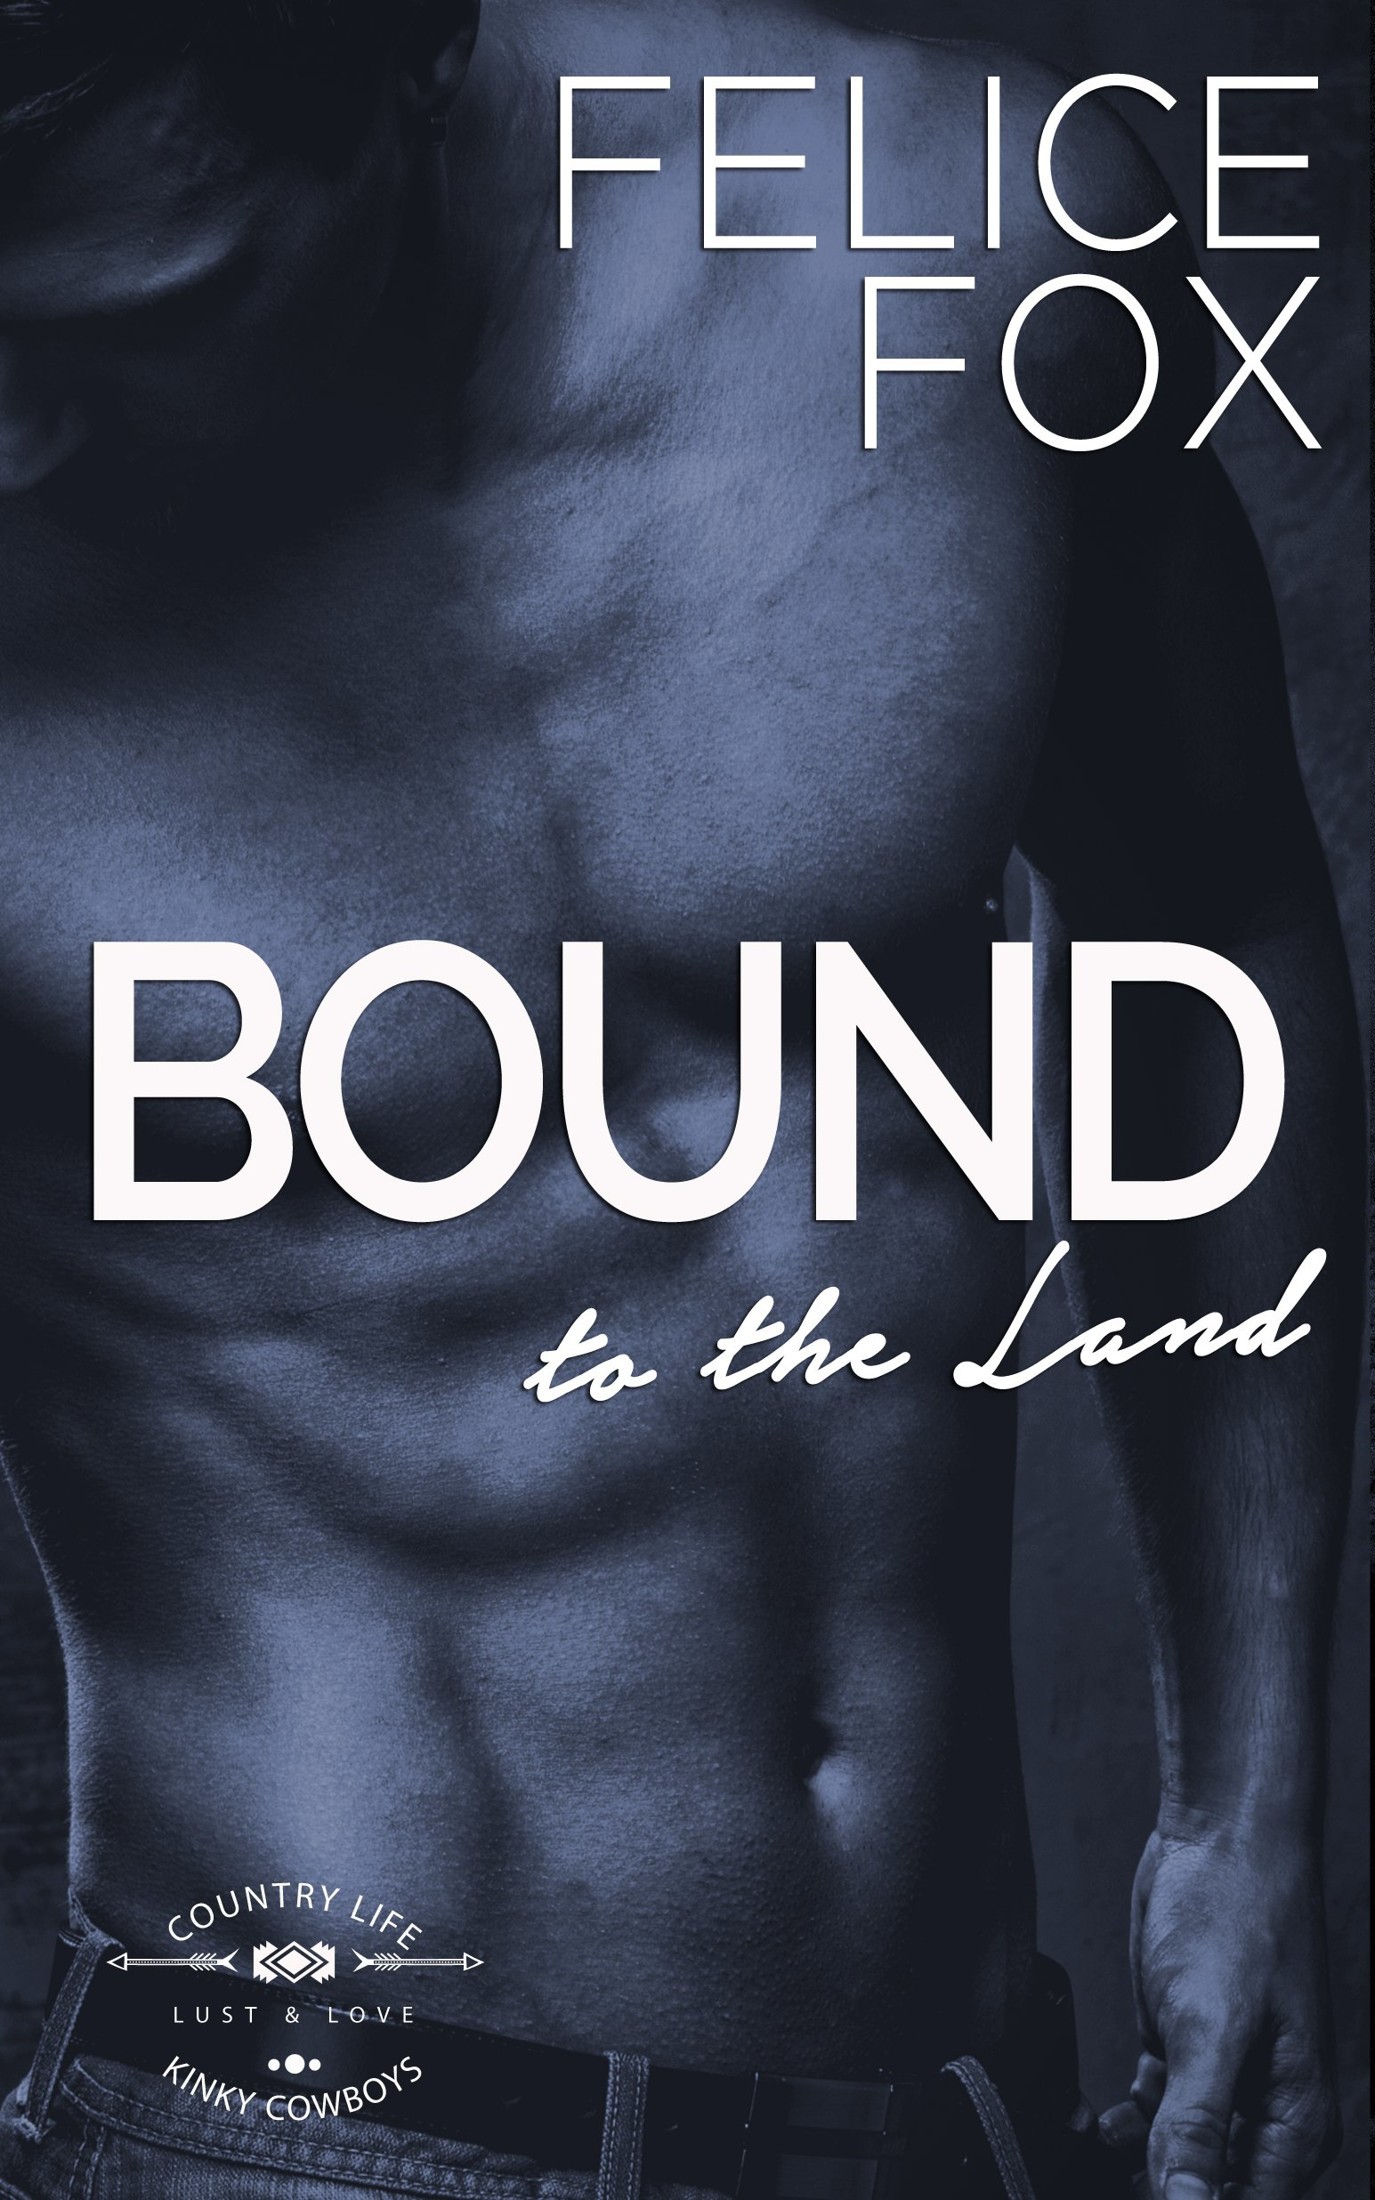 Bound to the Land by Felice Fox